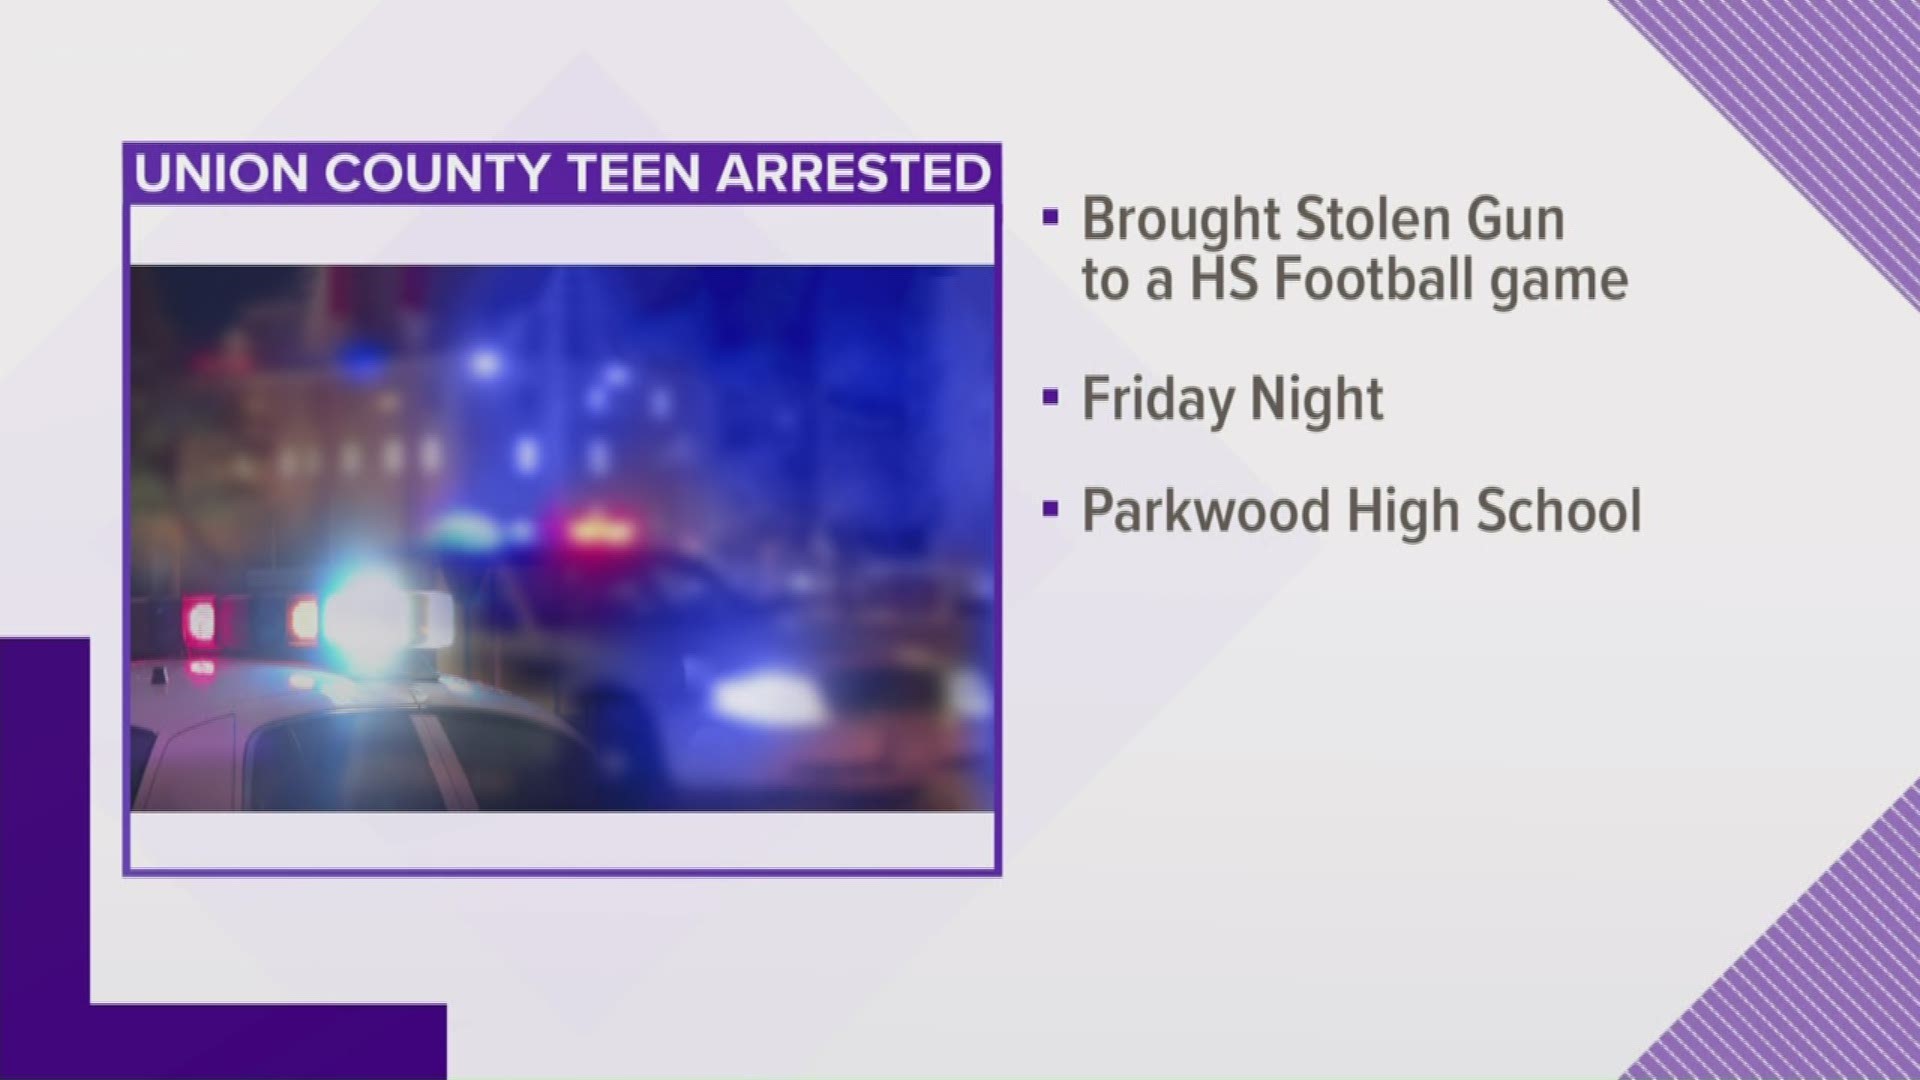 Union County deputies say a 15-year-old brought a stolen handgun to a Parkwood High School football game.